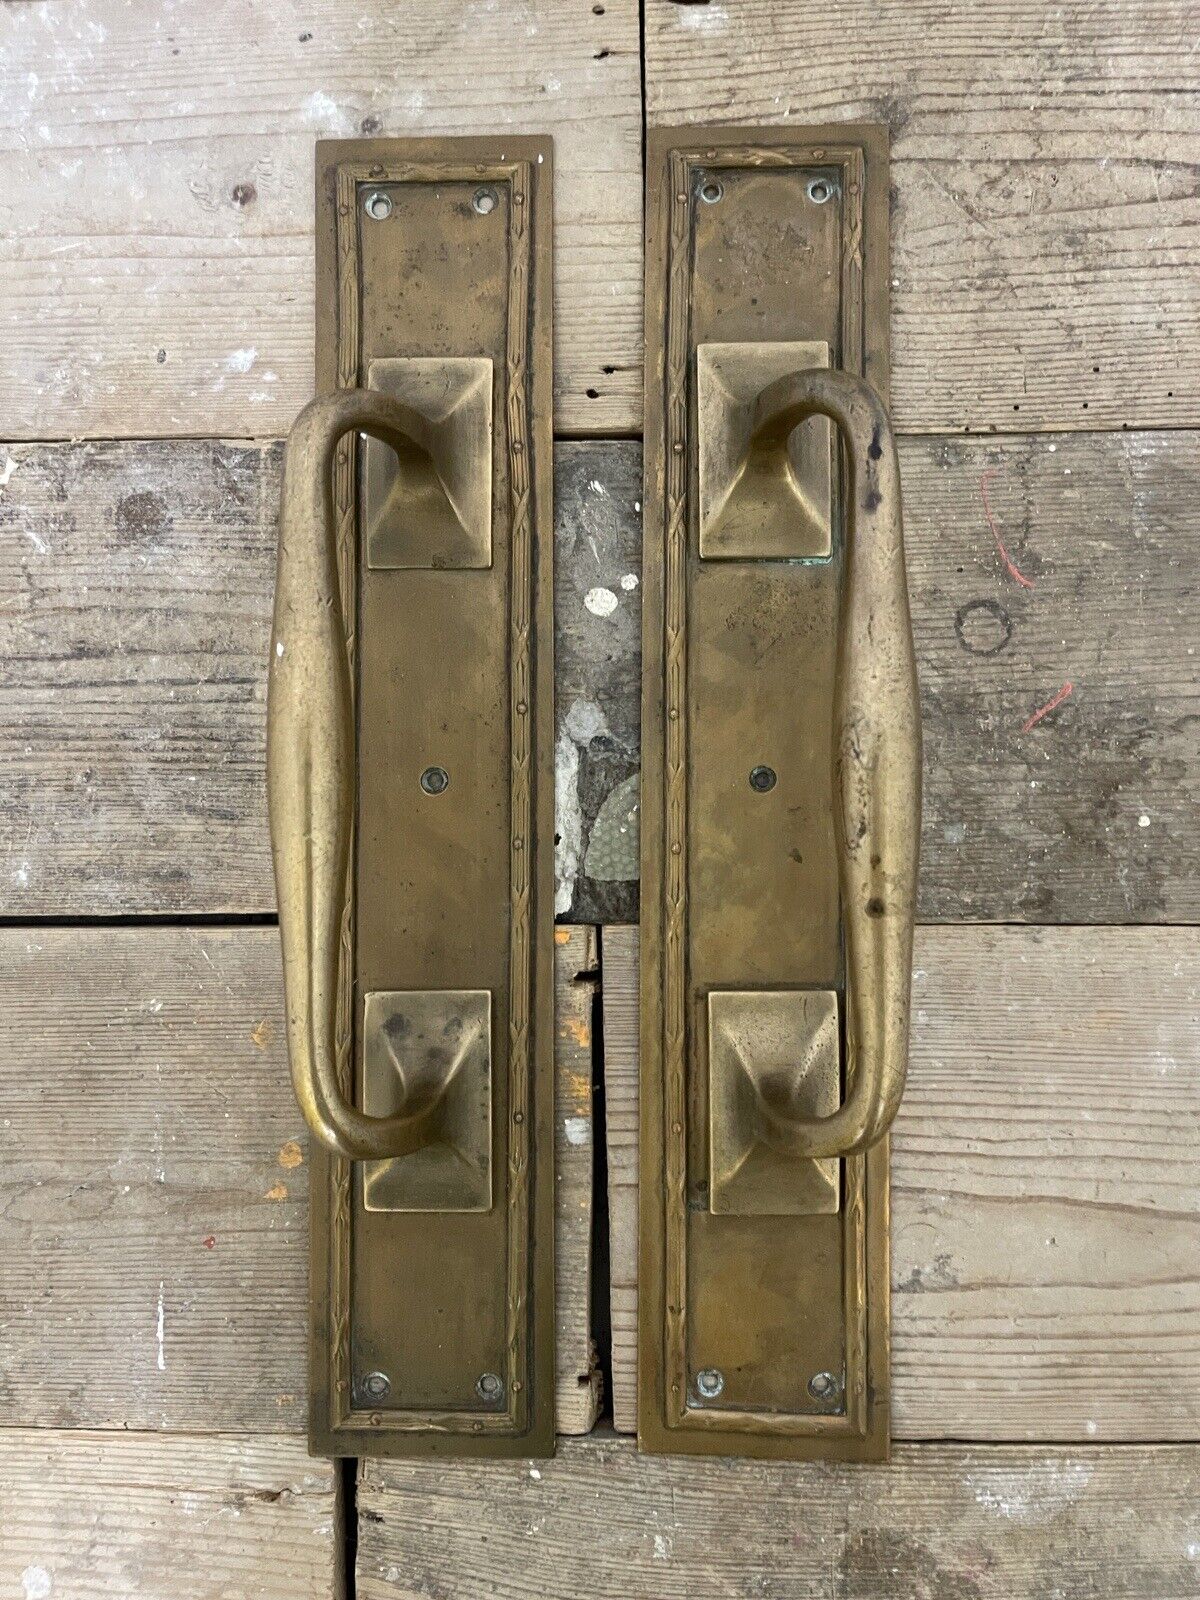 Pair Of Large Reclaimed Antique Brass Door Handles 15 inches or 380mm